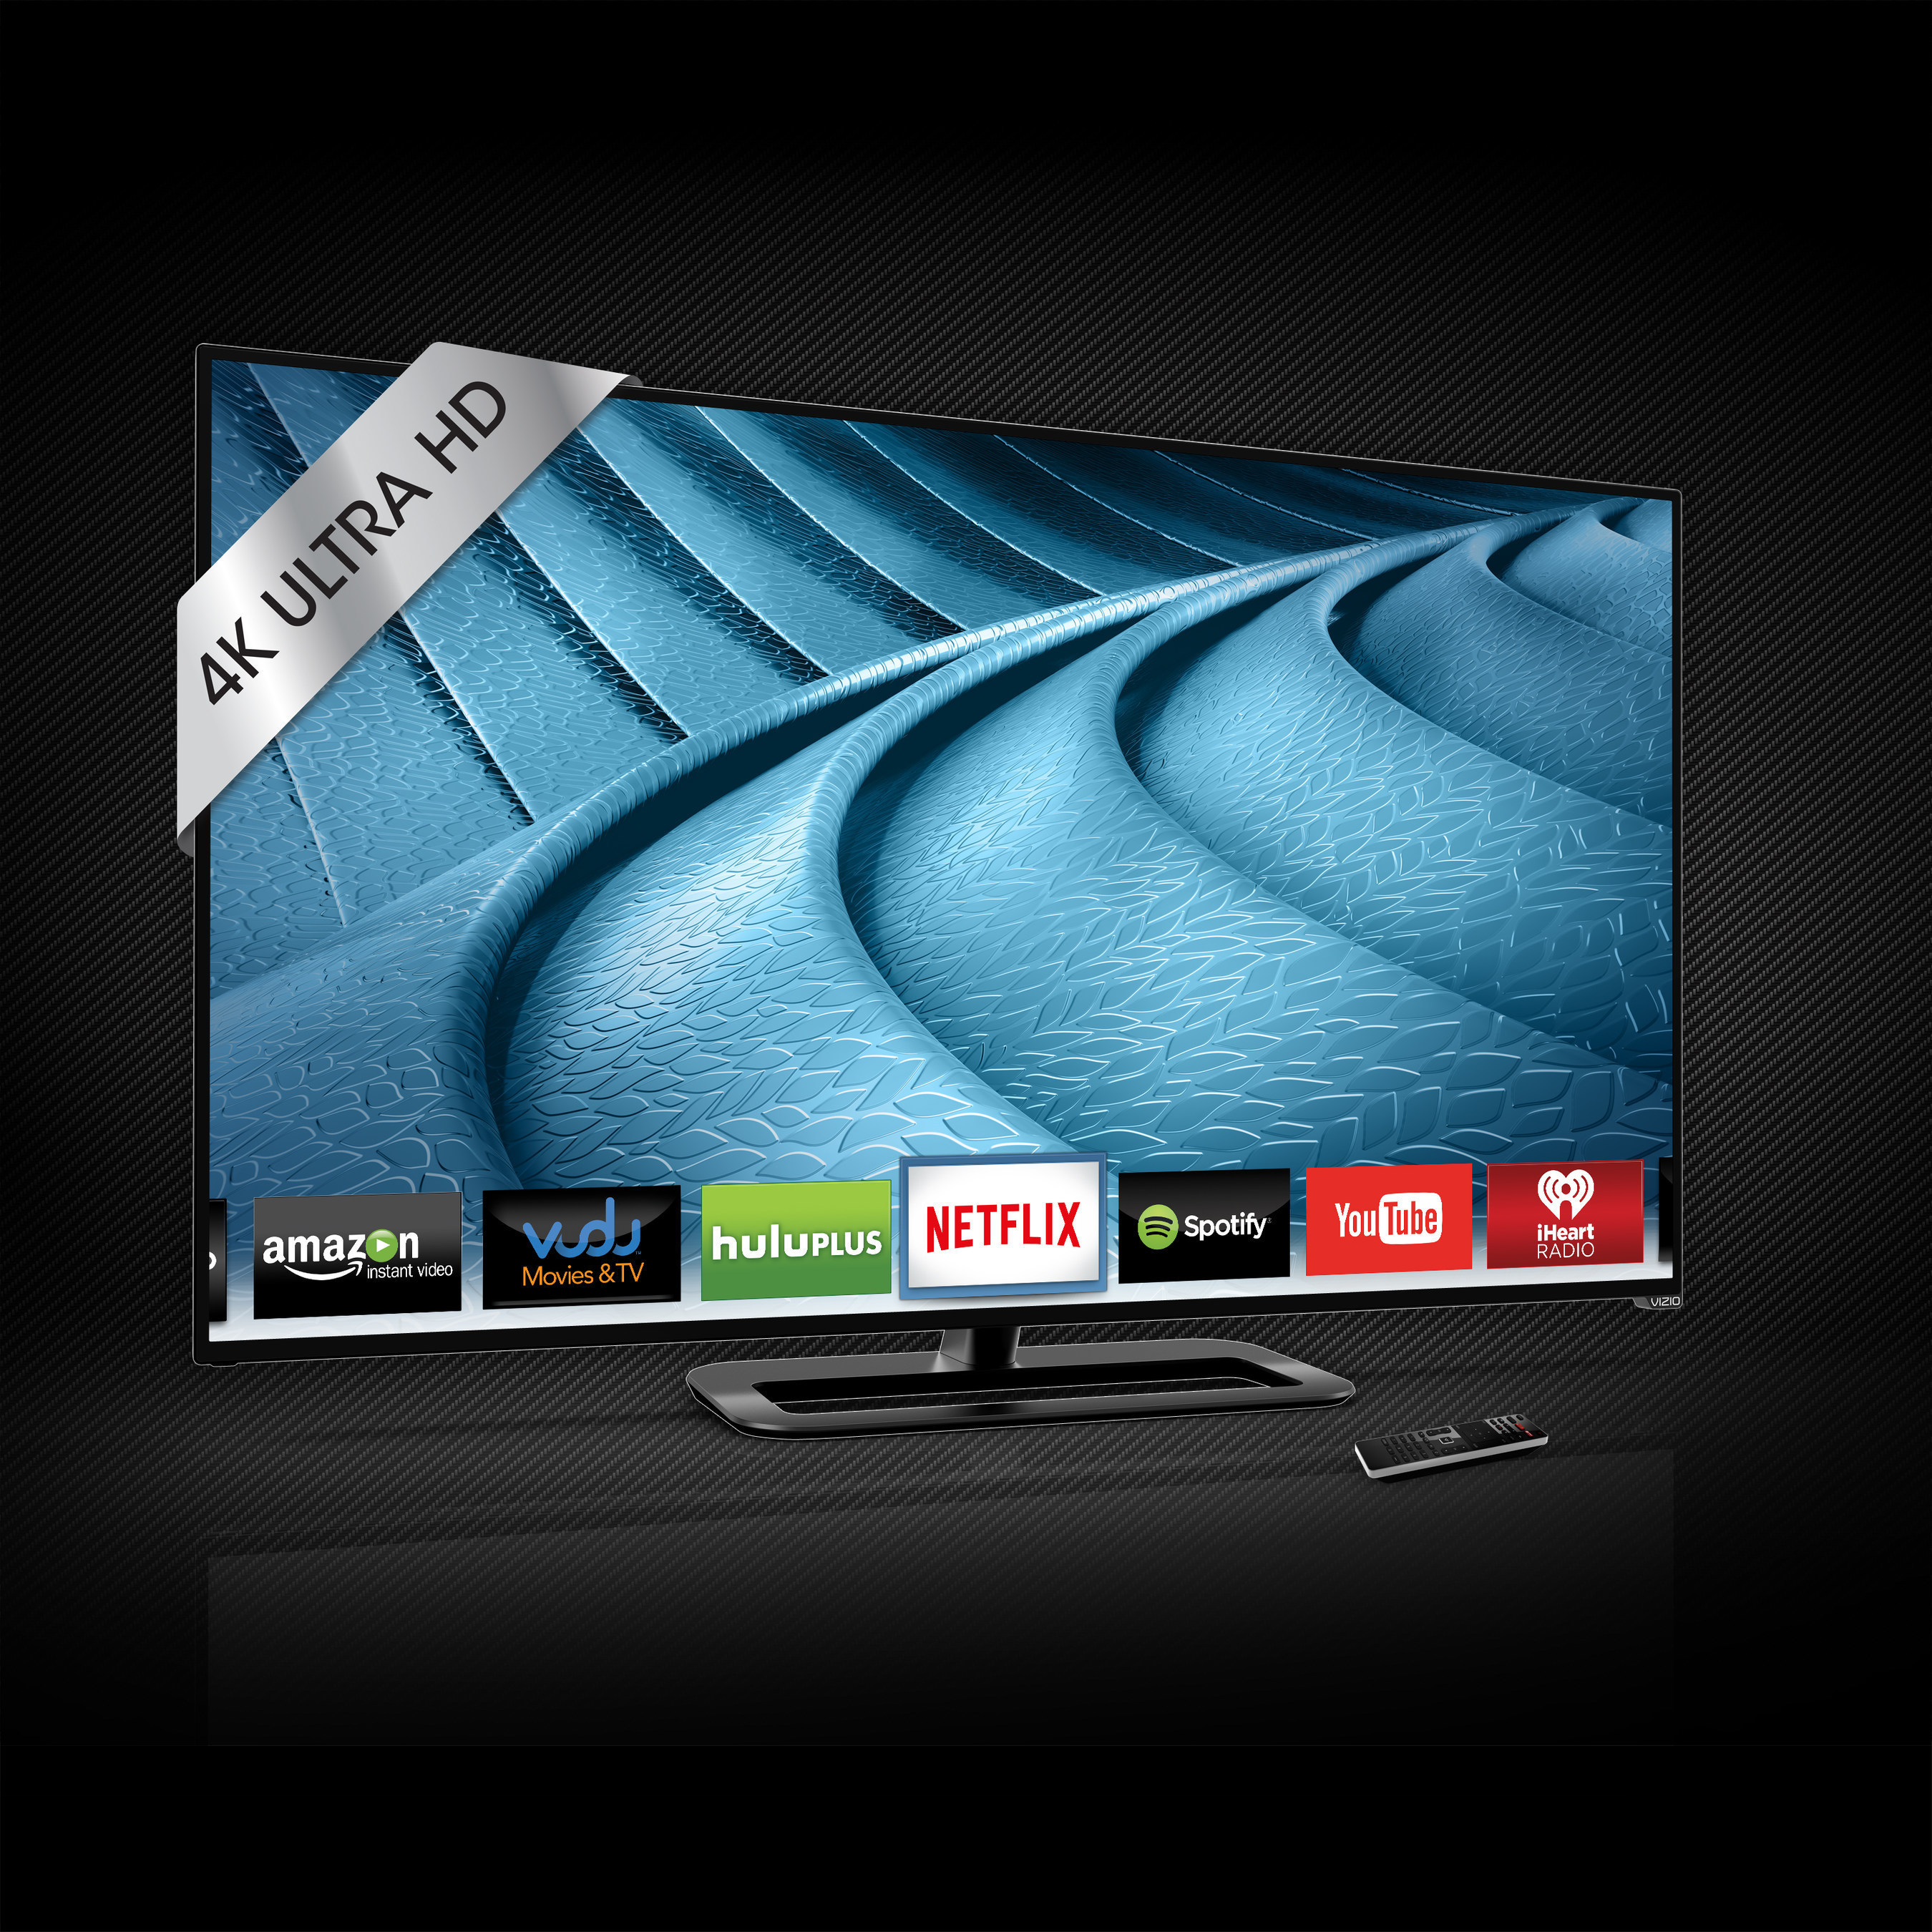 VIZIO Reveals Highly Anticipated P-Series Ultra HD Full-Array LED Smart TV Collection, Combining Unparalleled Picture Quality and Advanced Performance for the Ultimate Entertainment Experience. Award-Winning Collection Features Advanced Local Dimming with Up to 72 Active LED Zones, Spatial Scaling Engine for Beautiful Upscaling of HD Content to 4K Ultra HD and VIZIO's V6 Six-Core Processor for Powerful Performance. (PRNewsFoto/VIZIO, Inc.)